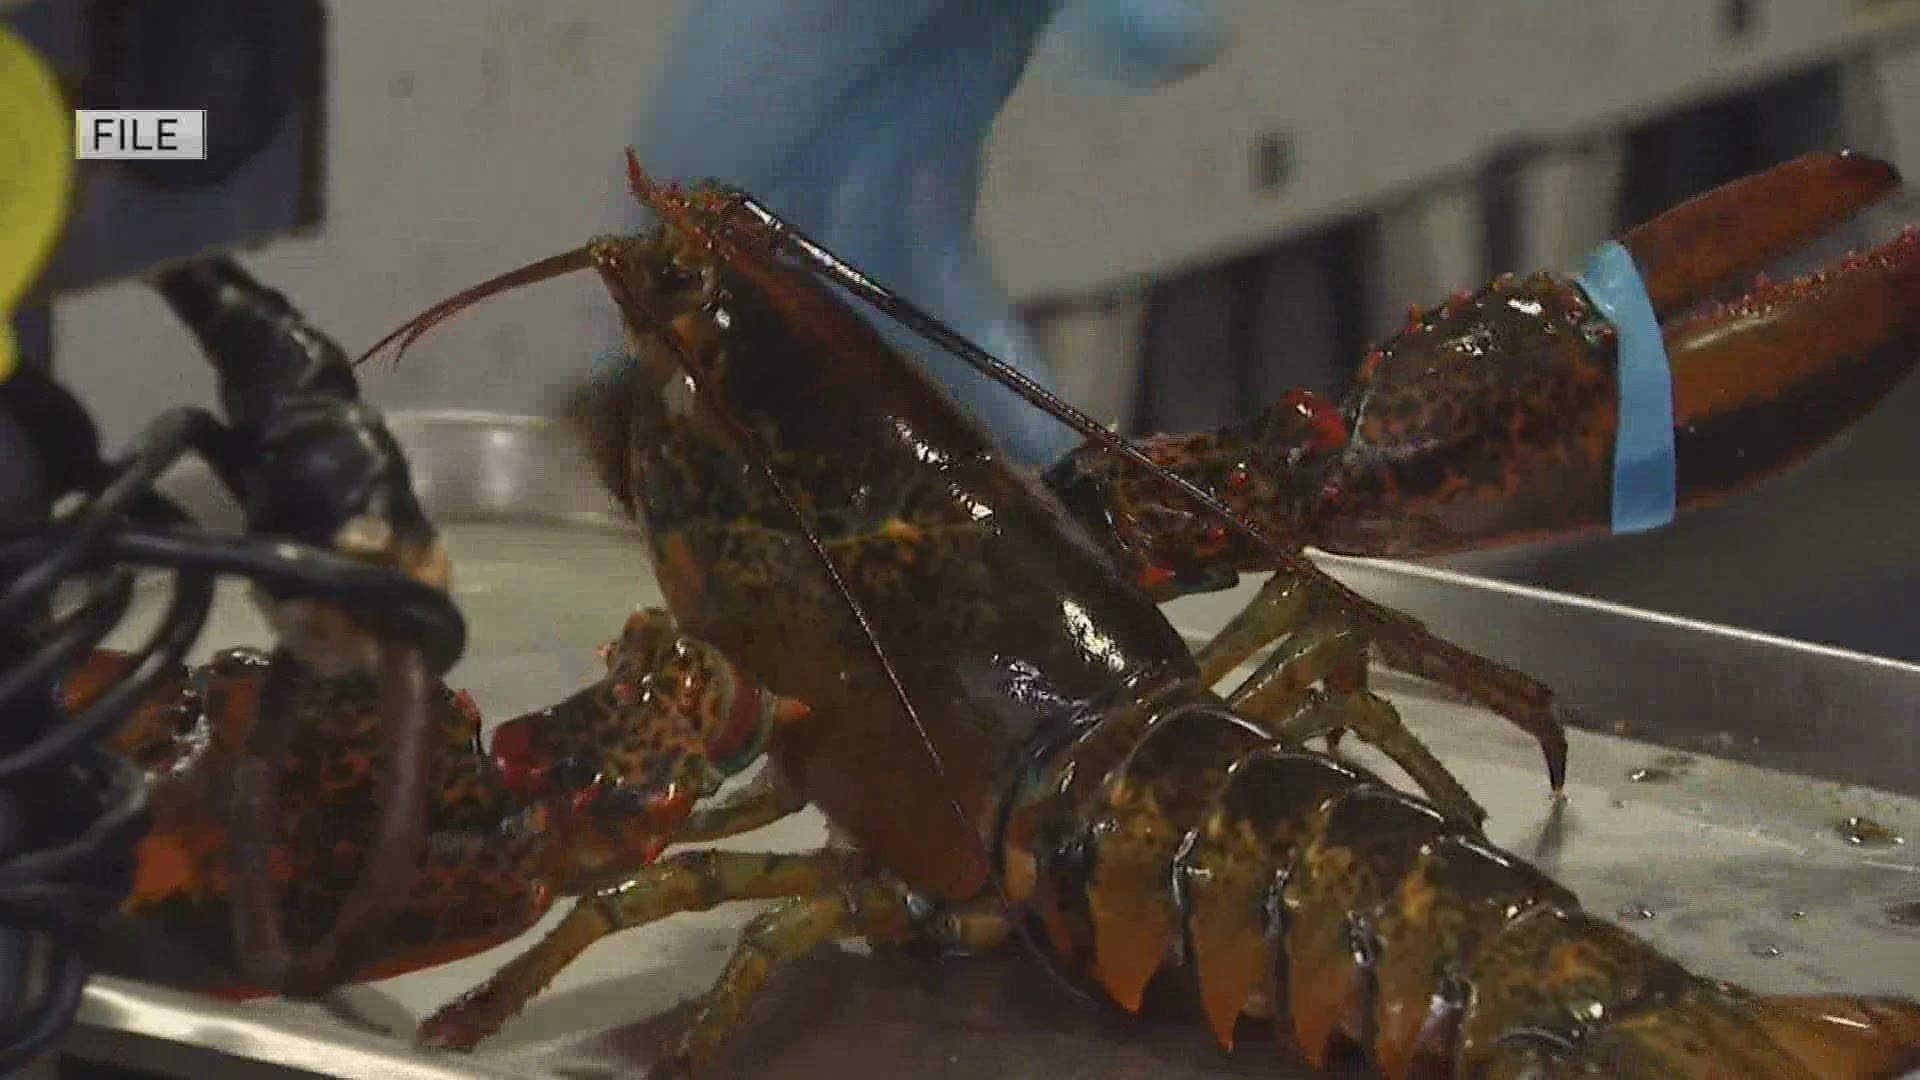 Maine lobster industry takes national stage with shoutout from Trump and appearance at the RNC